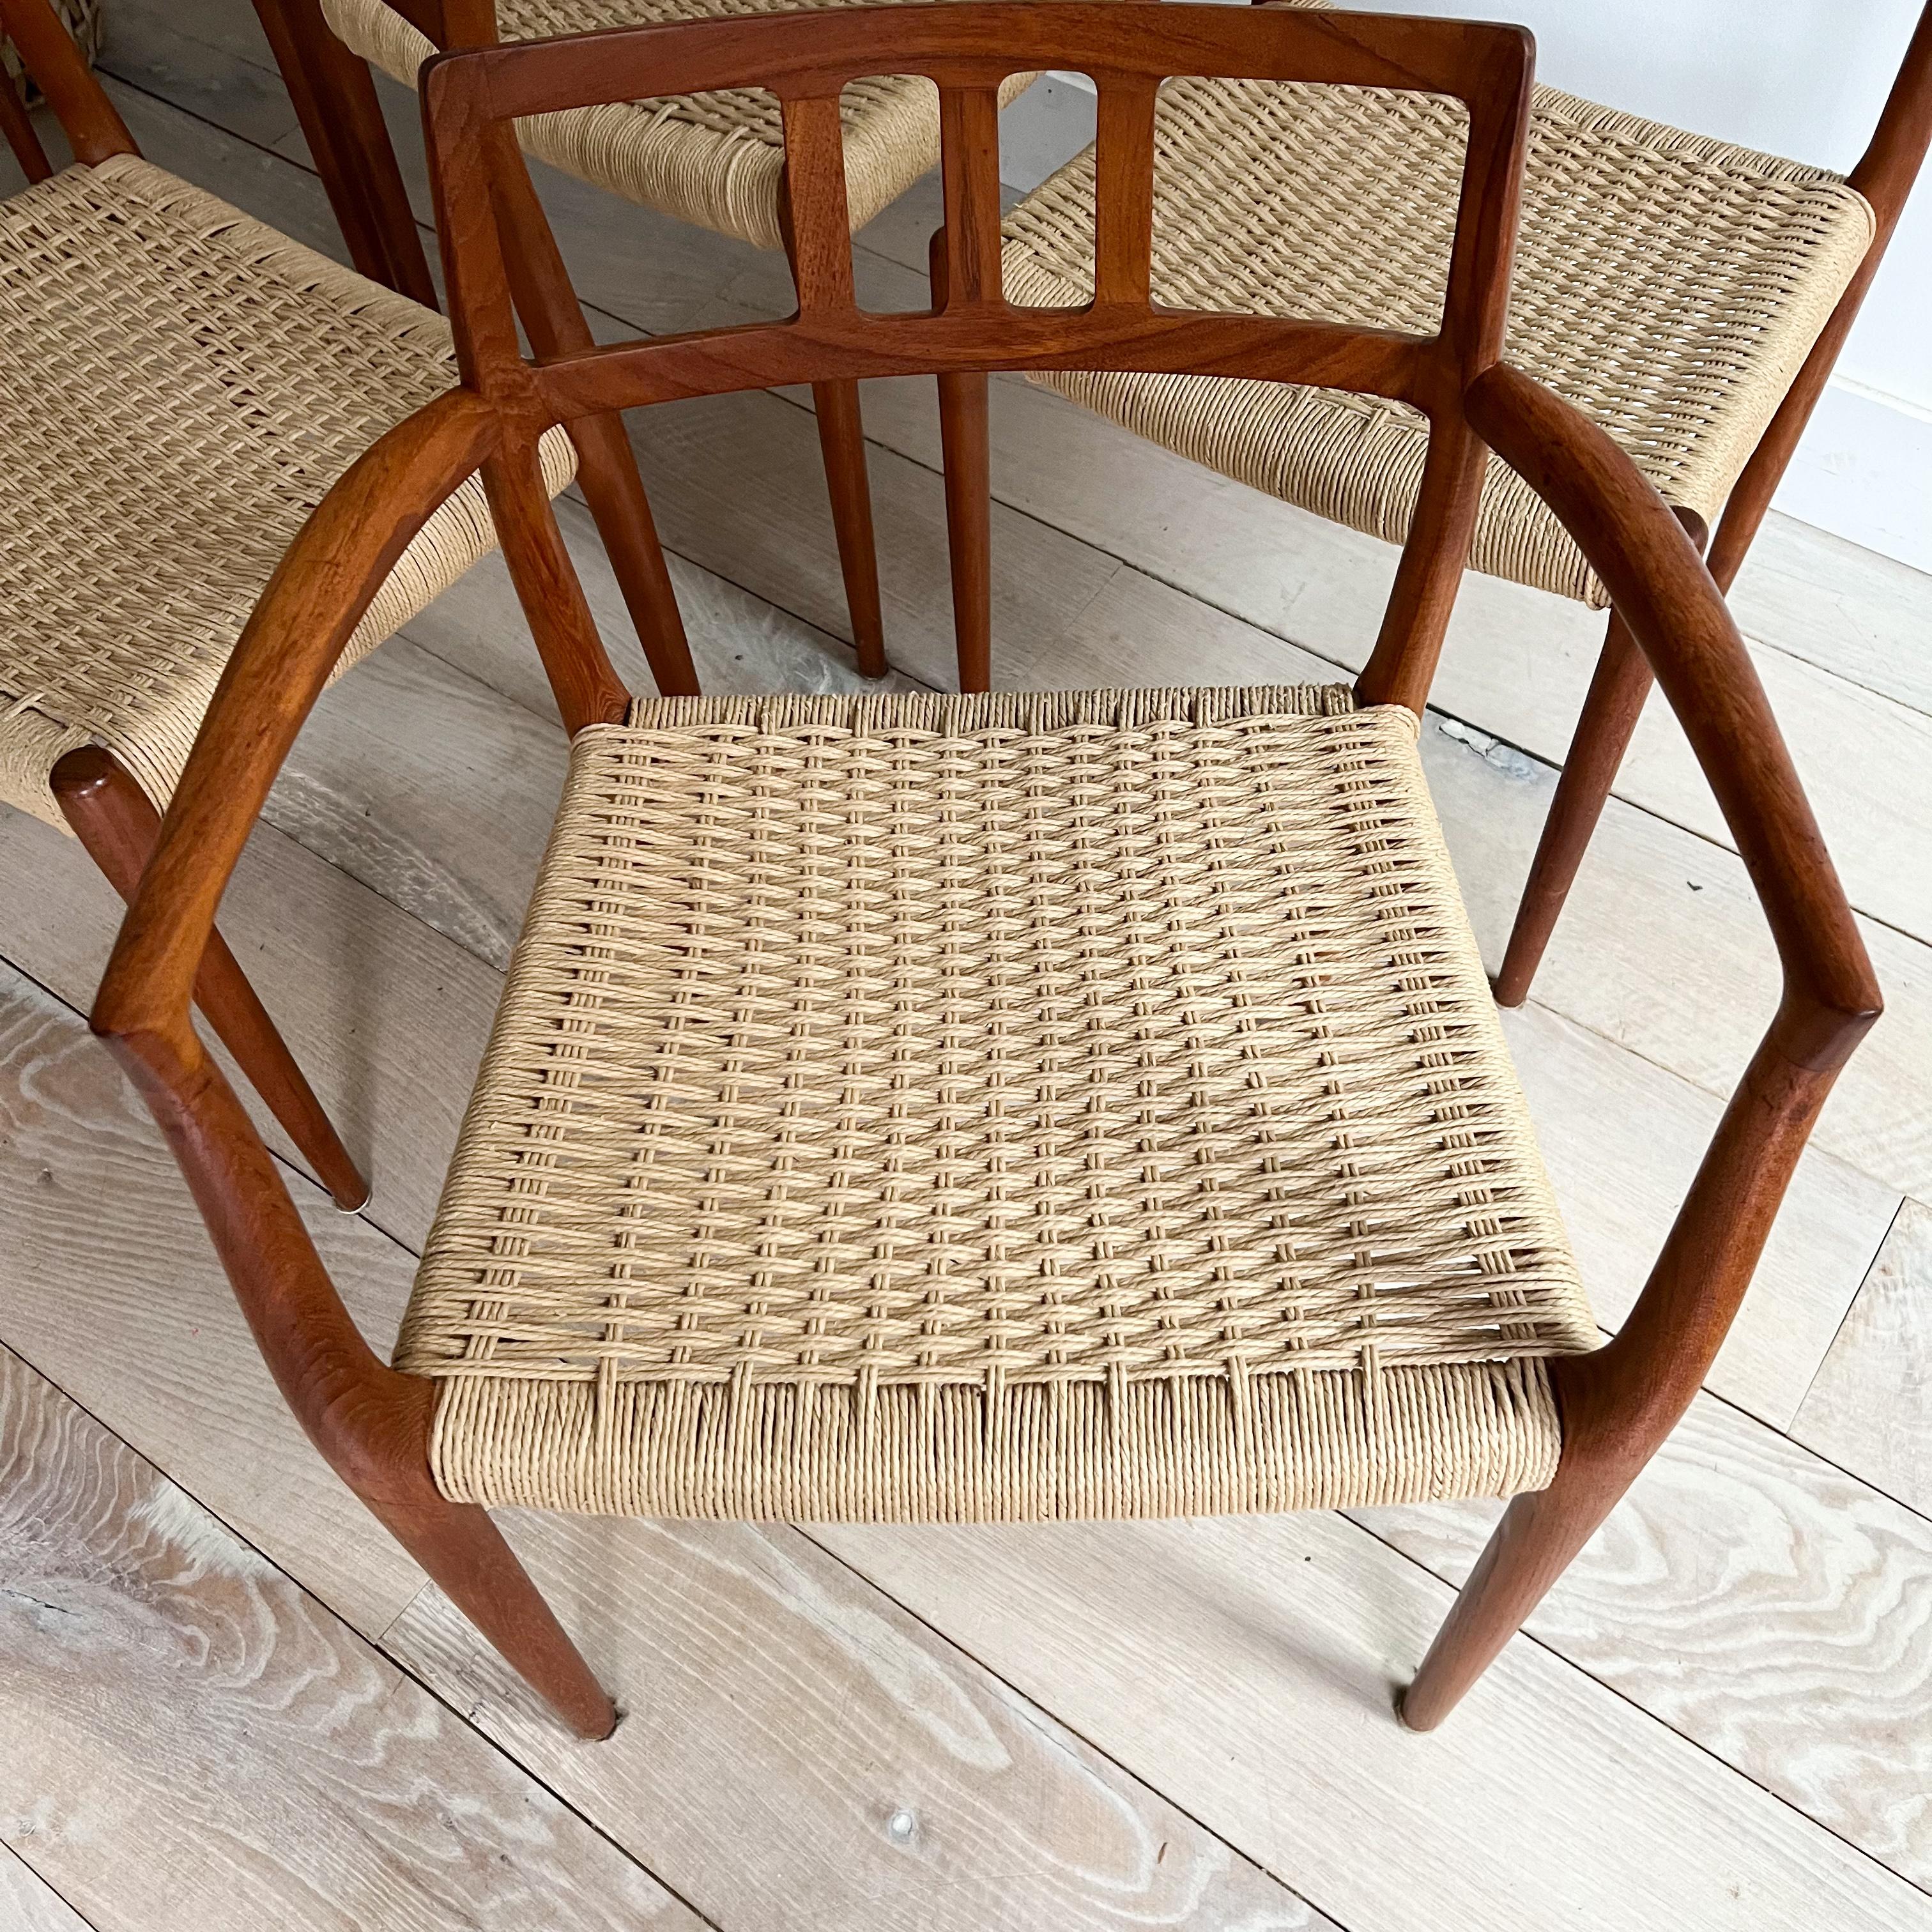 Set of 6 Niels Moller Dining Chairs #79 and #64 1